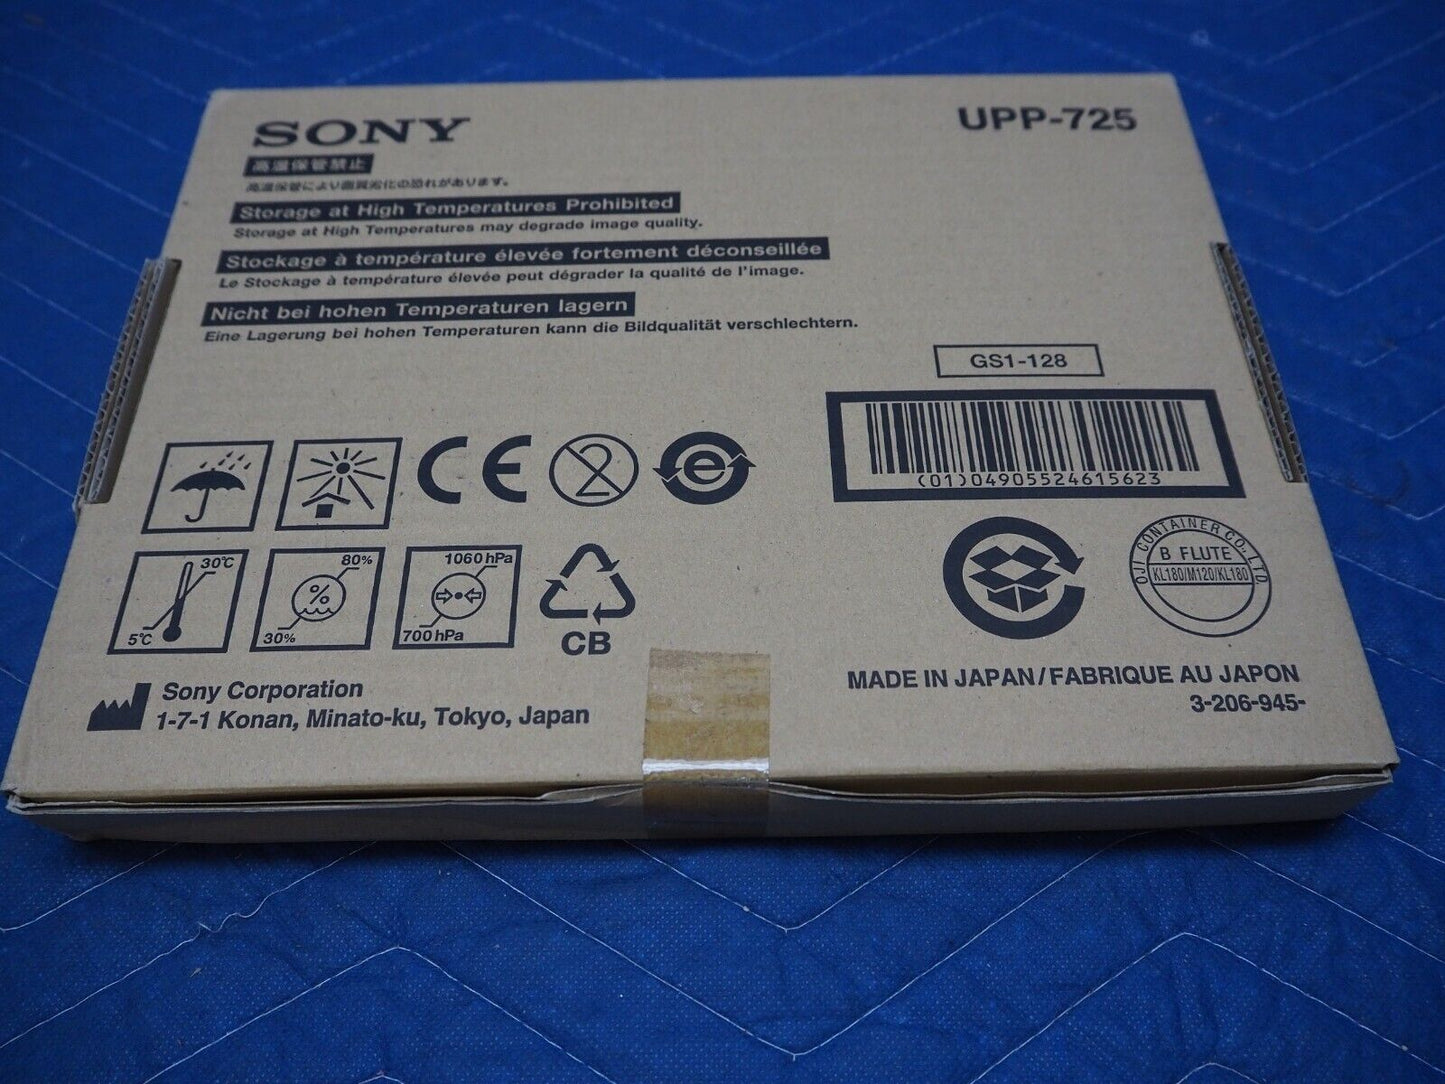 Sony UPP-725 Printing Paper 1 Box / 100 sheets For UP-D74XRD   UP-D72XR  12729